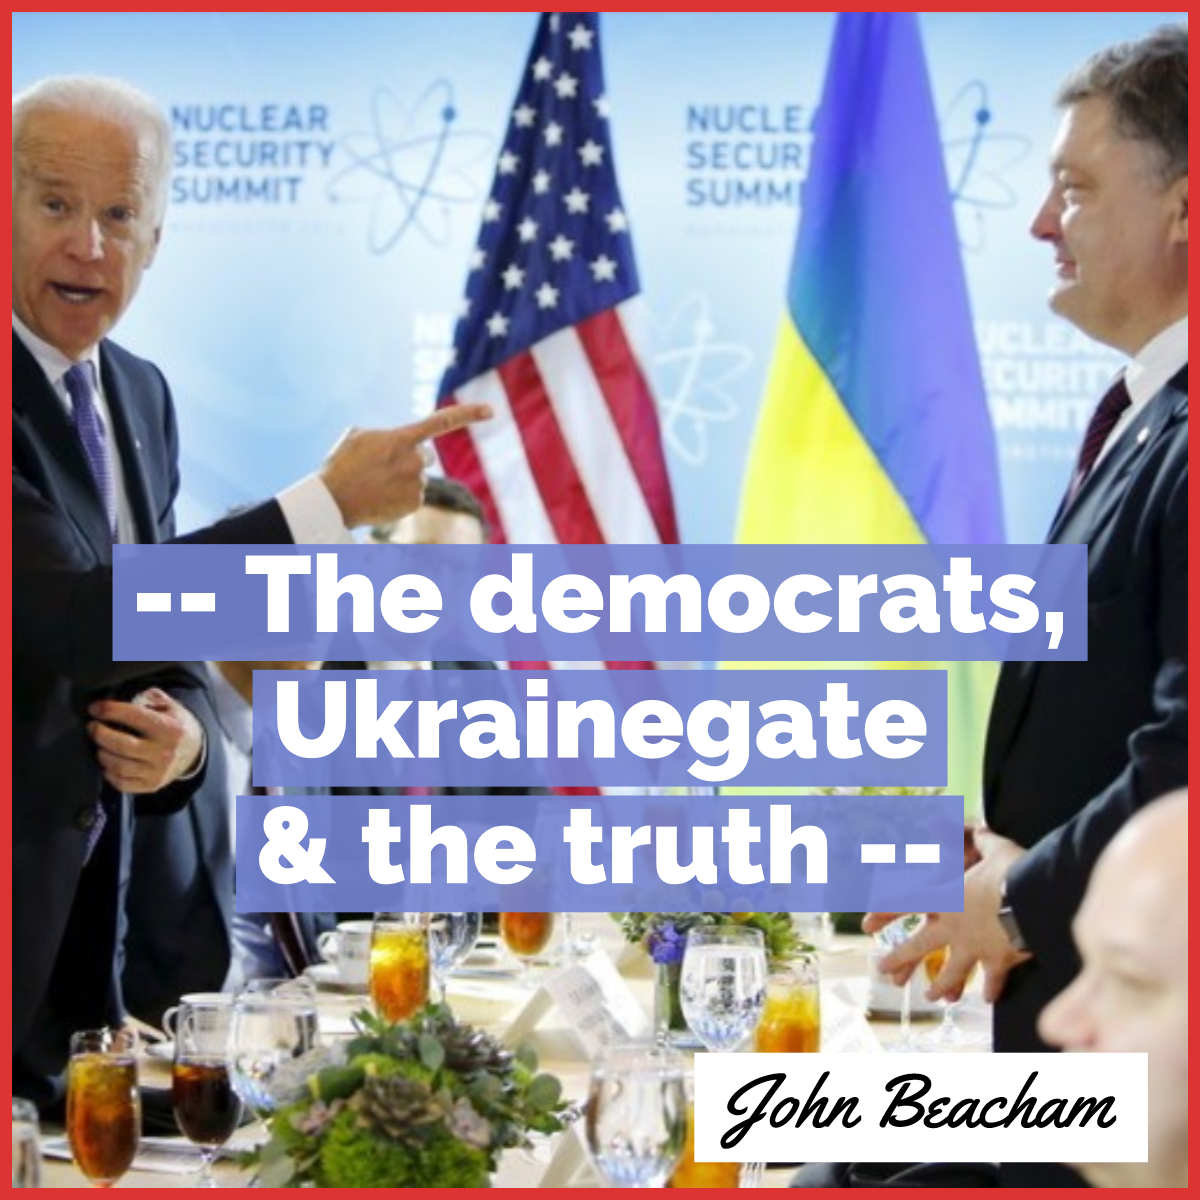 The democrats, Ukrainegate and the truth: it really does matter how you bring a leader down